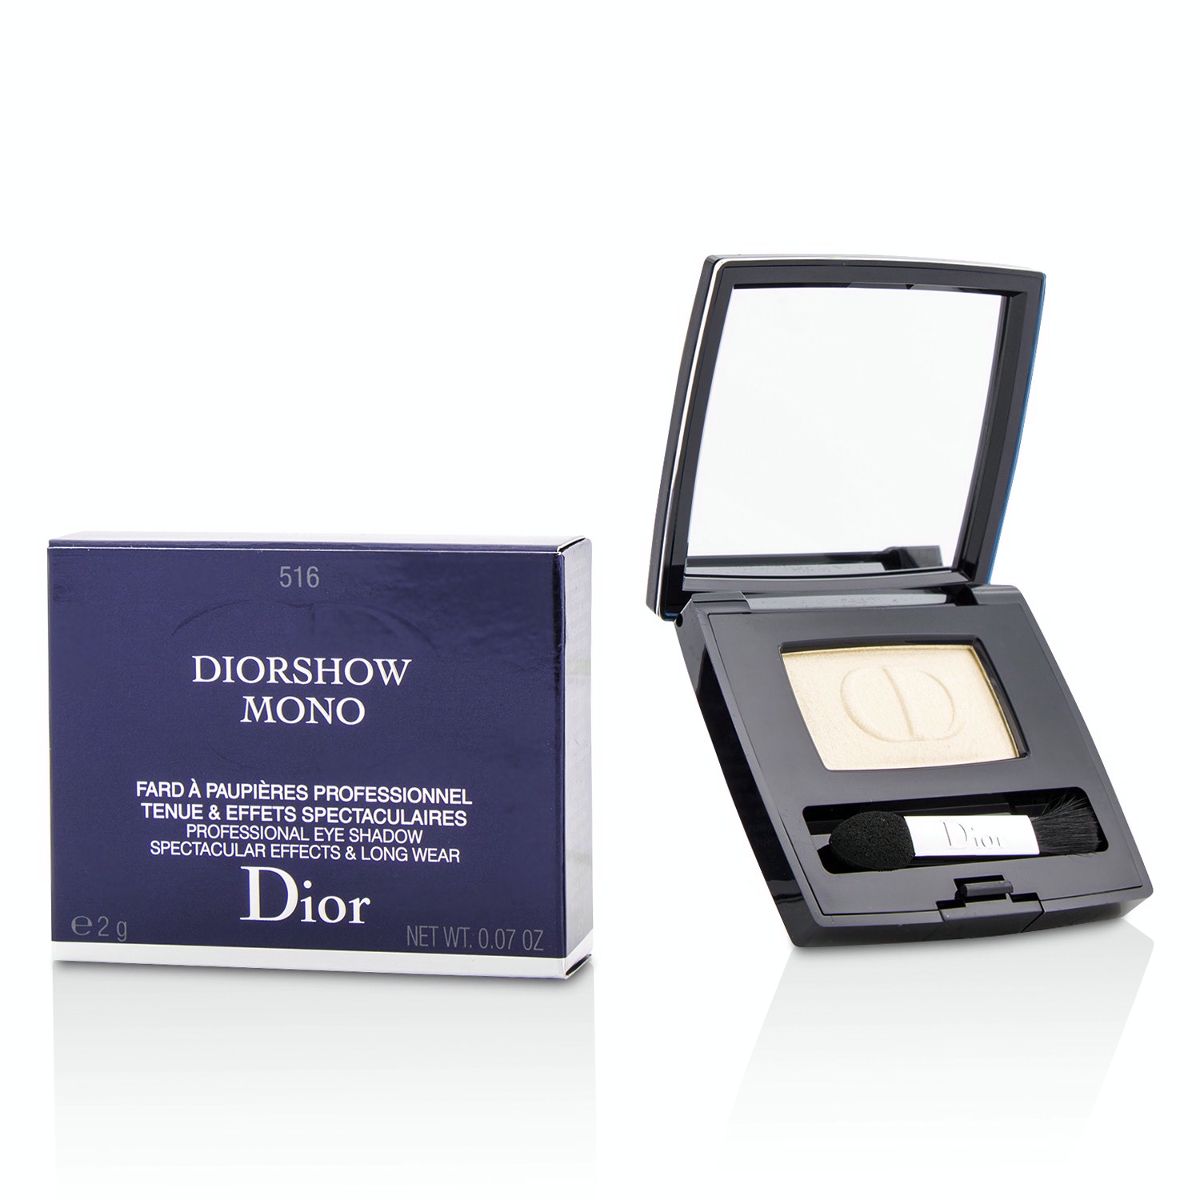 Diorshow Mono Professional Spectacular Effects  Long Wear Eyeshadow - # 516 Delicate Christian Dior Image